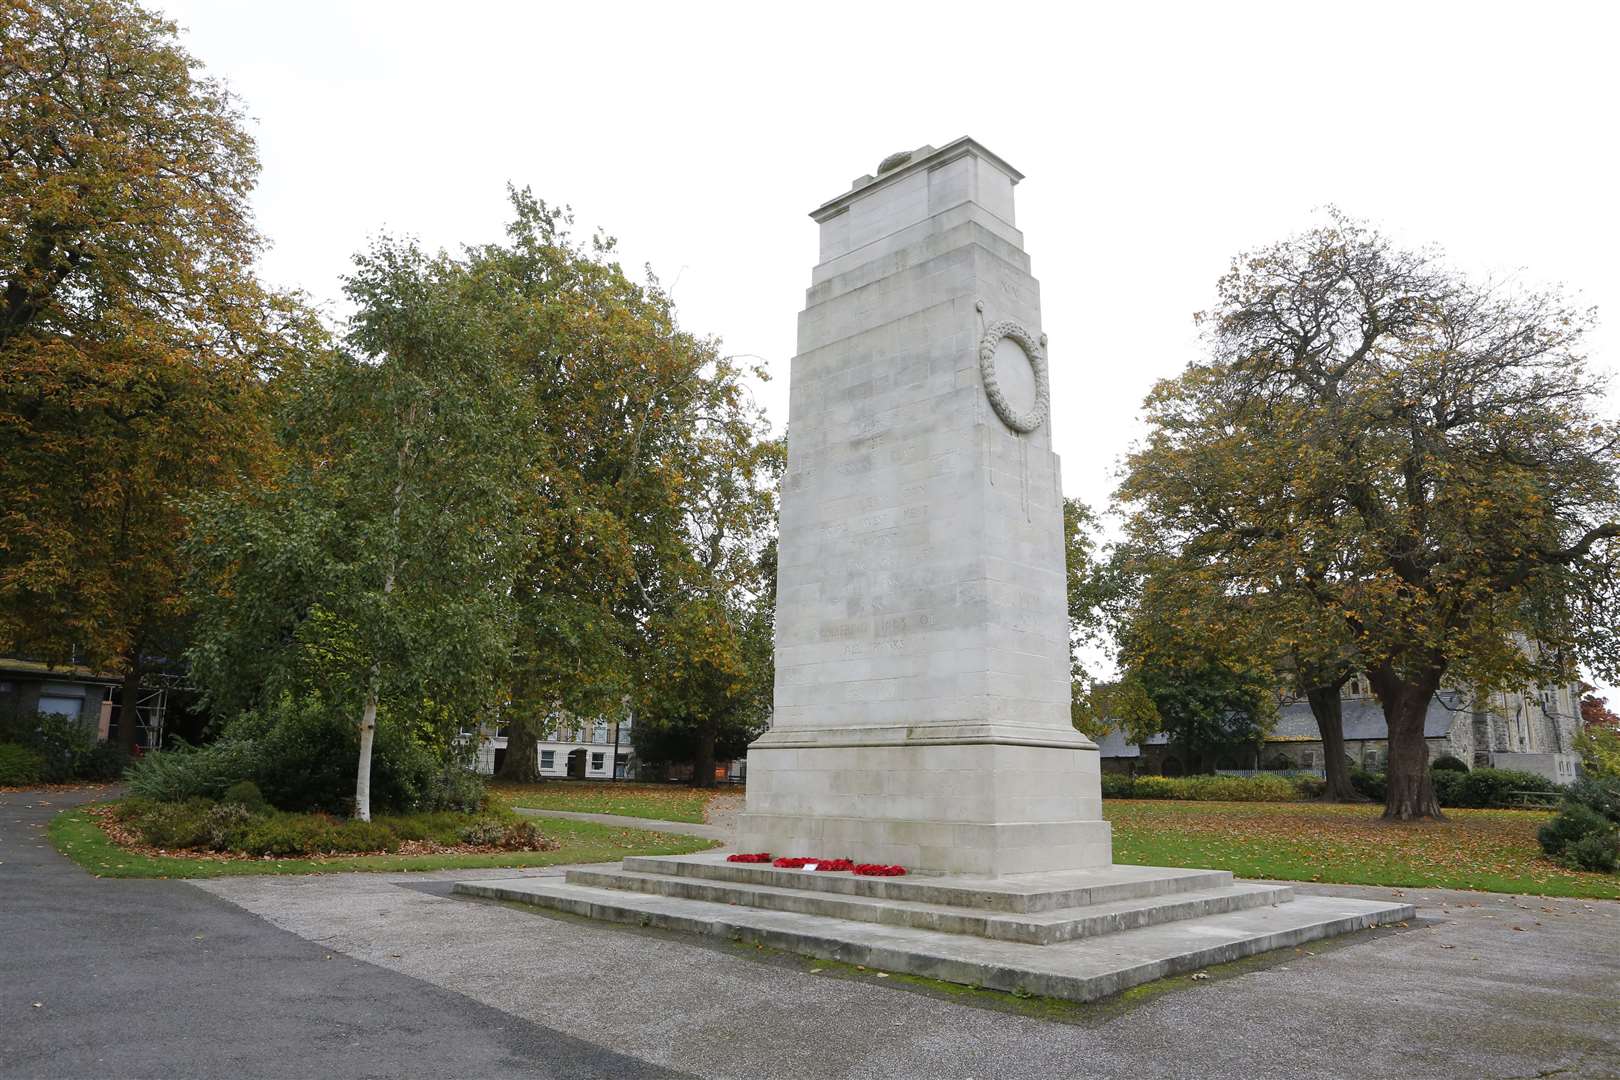 The gardens contain a cenotaph by Edward Lutyens that is a replica of the one in Whitehall